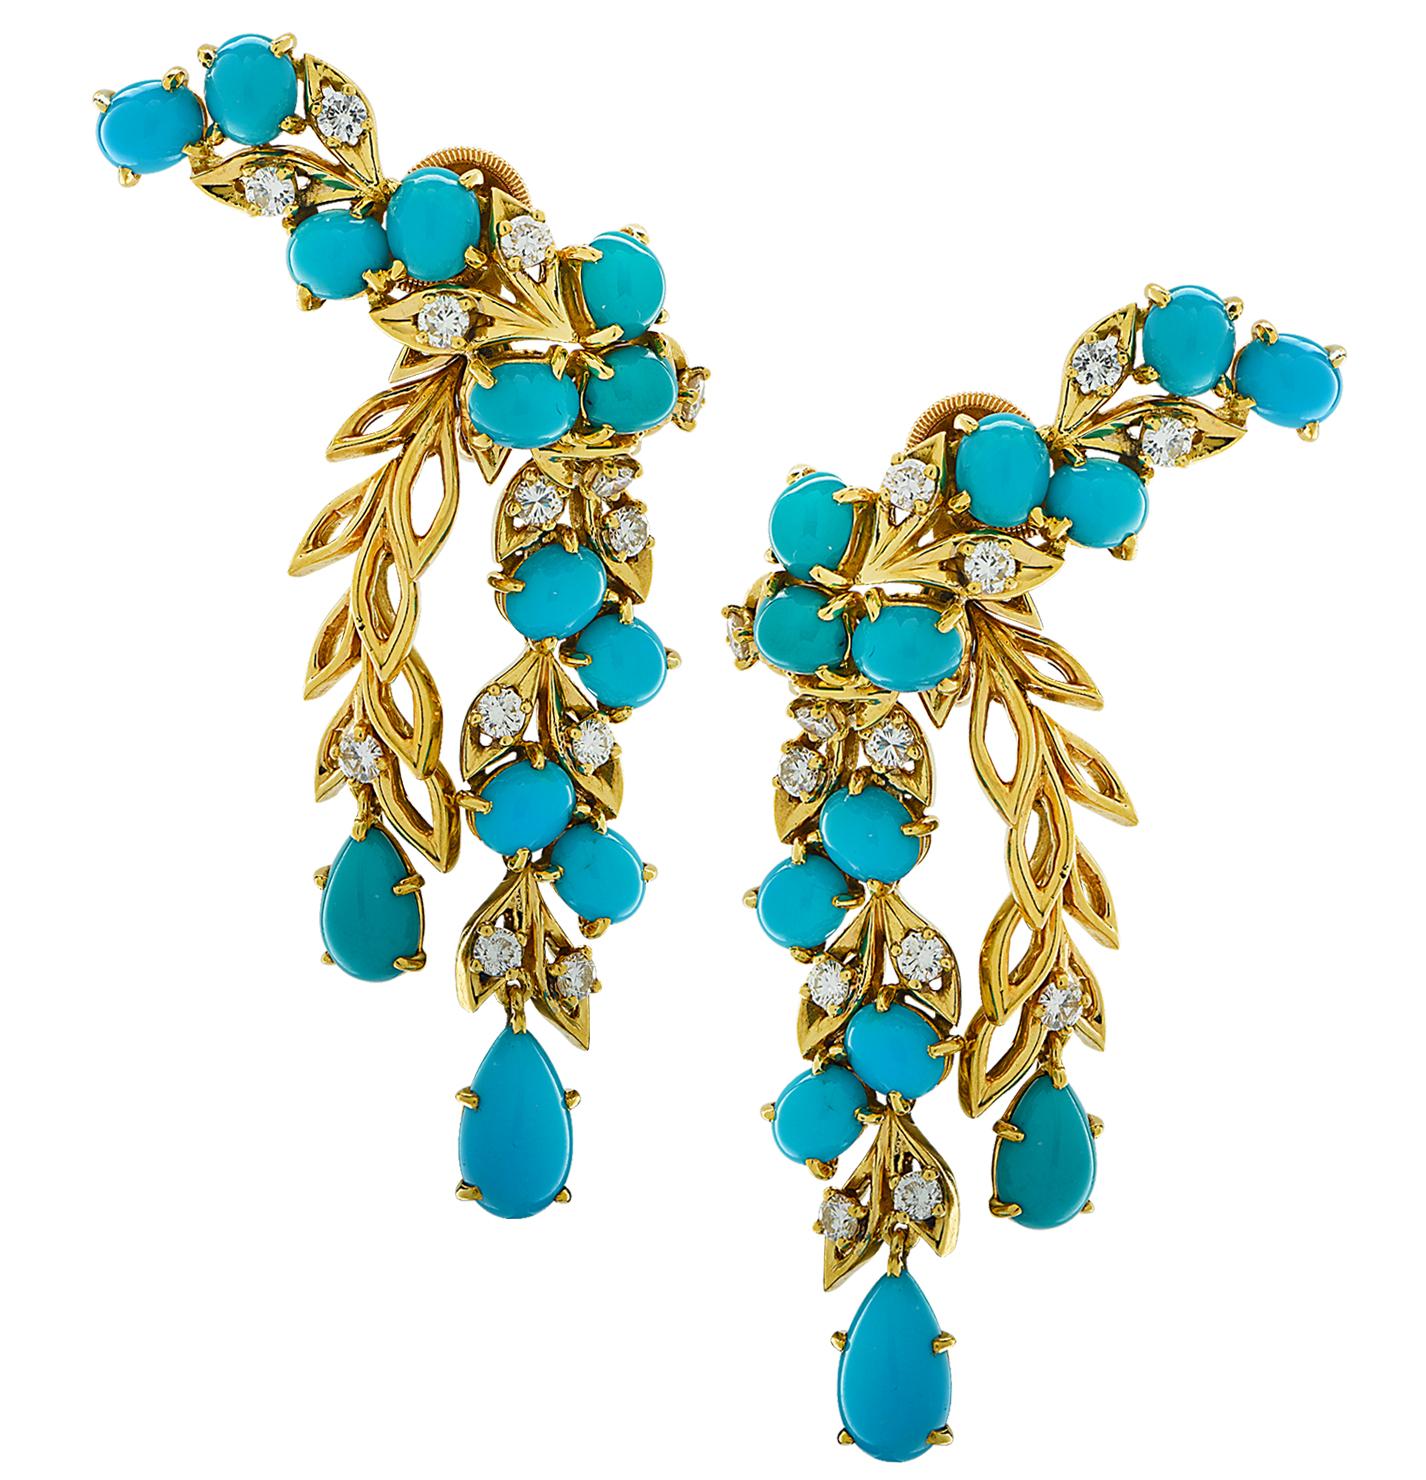 Cabochon French Cartier Diamond and Turquoise Earrings, circa 1960